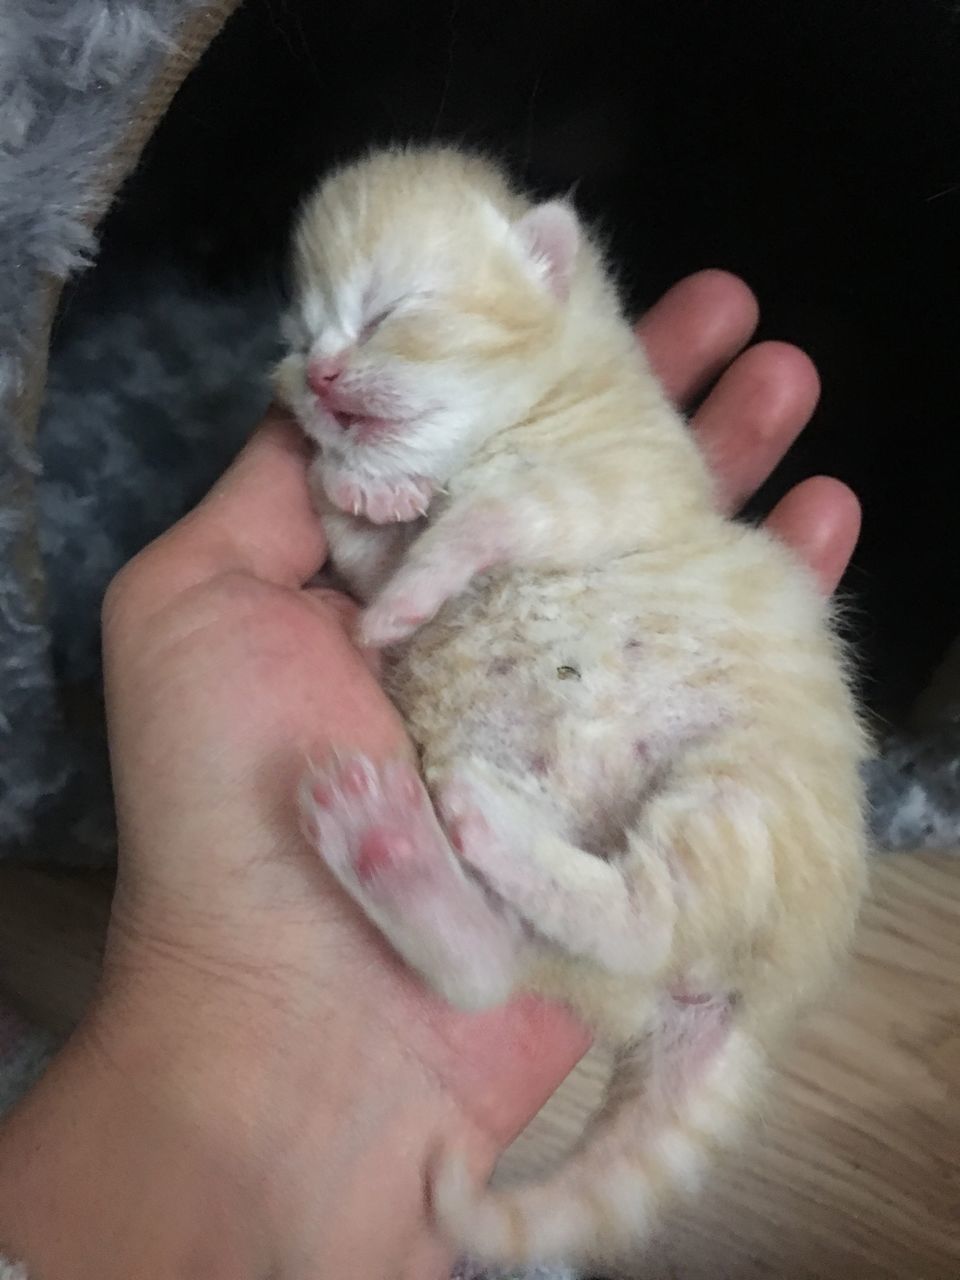 CROPPED IMAGE OF HAND ON KITTEN